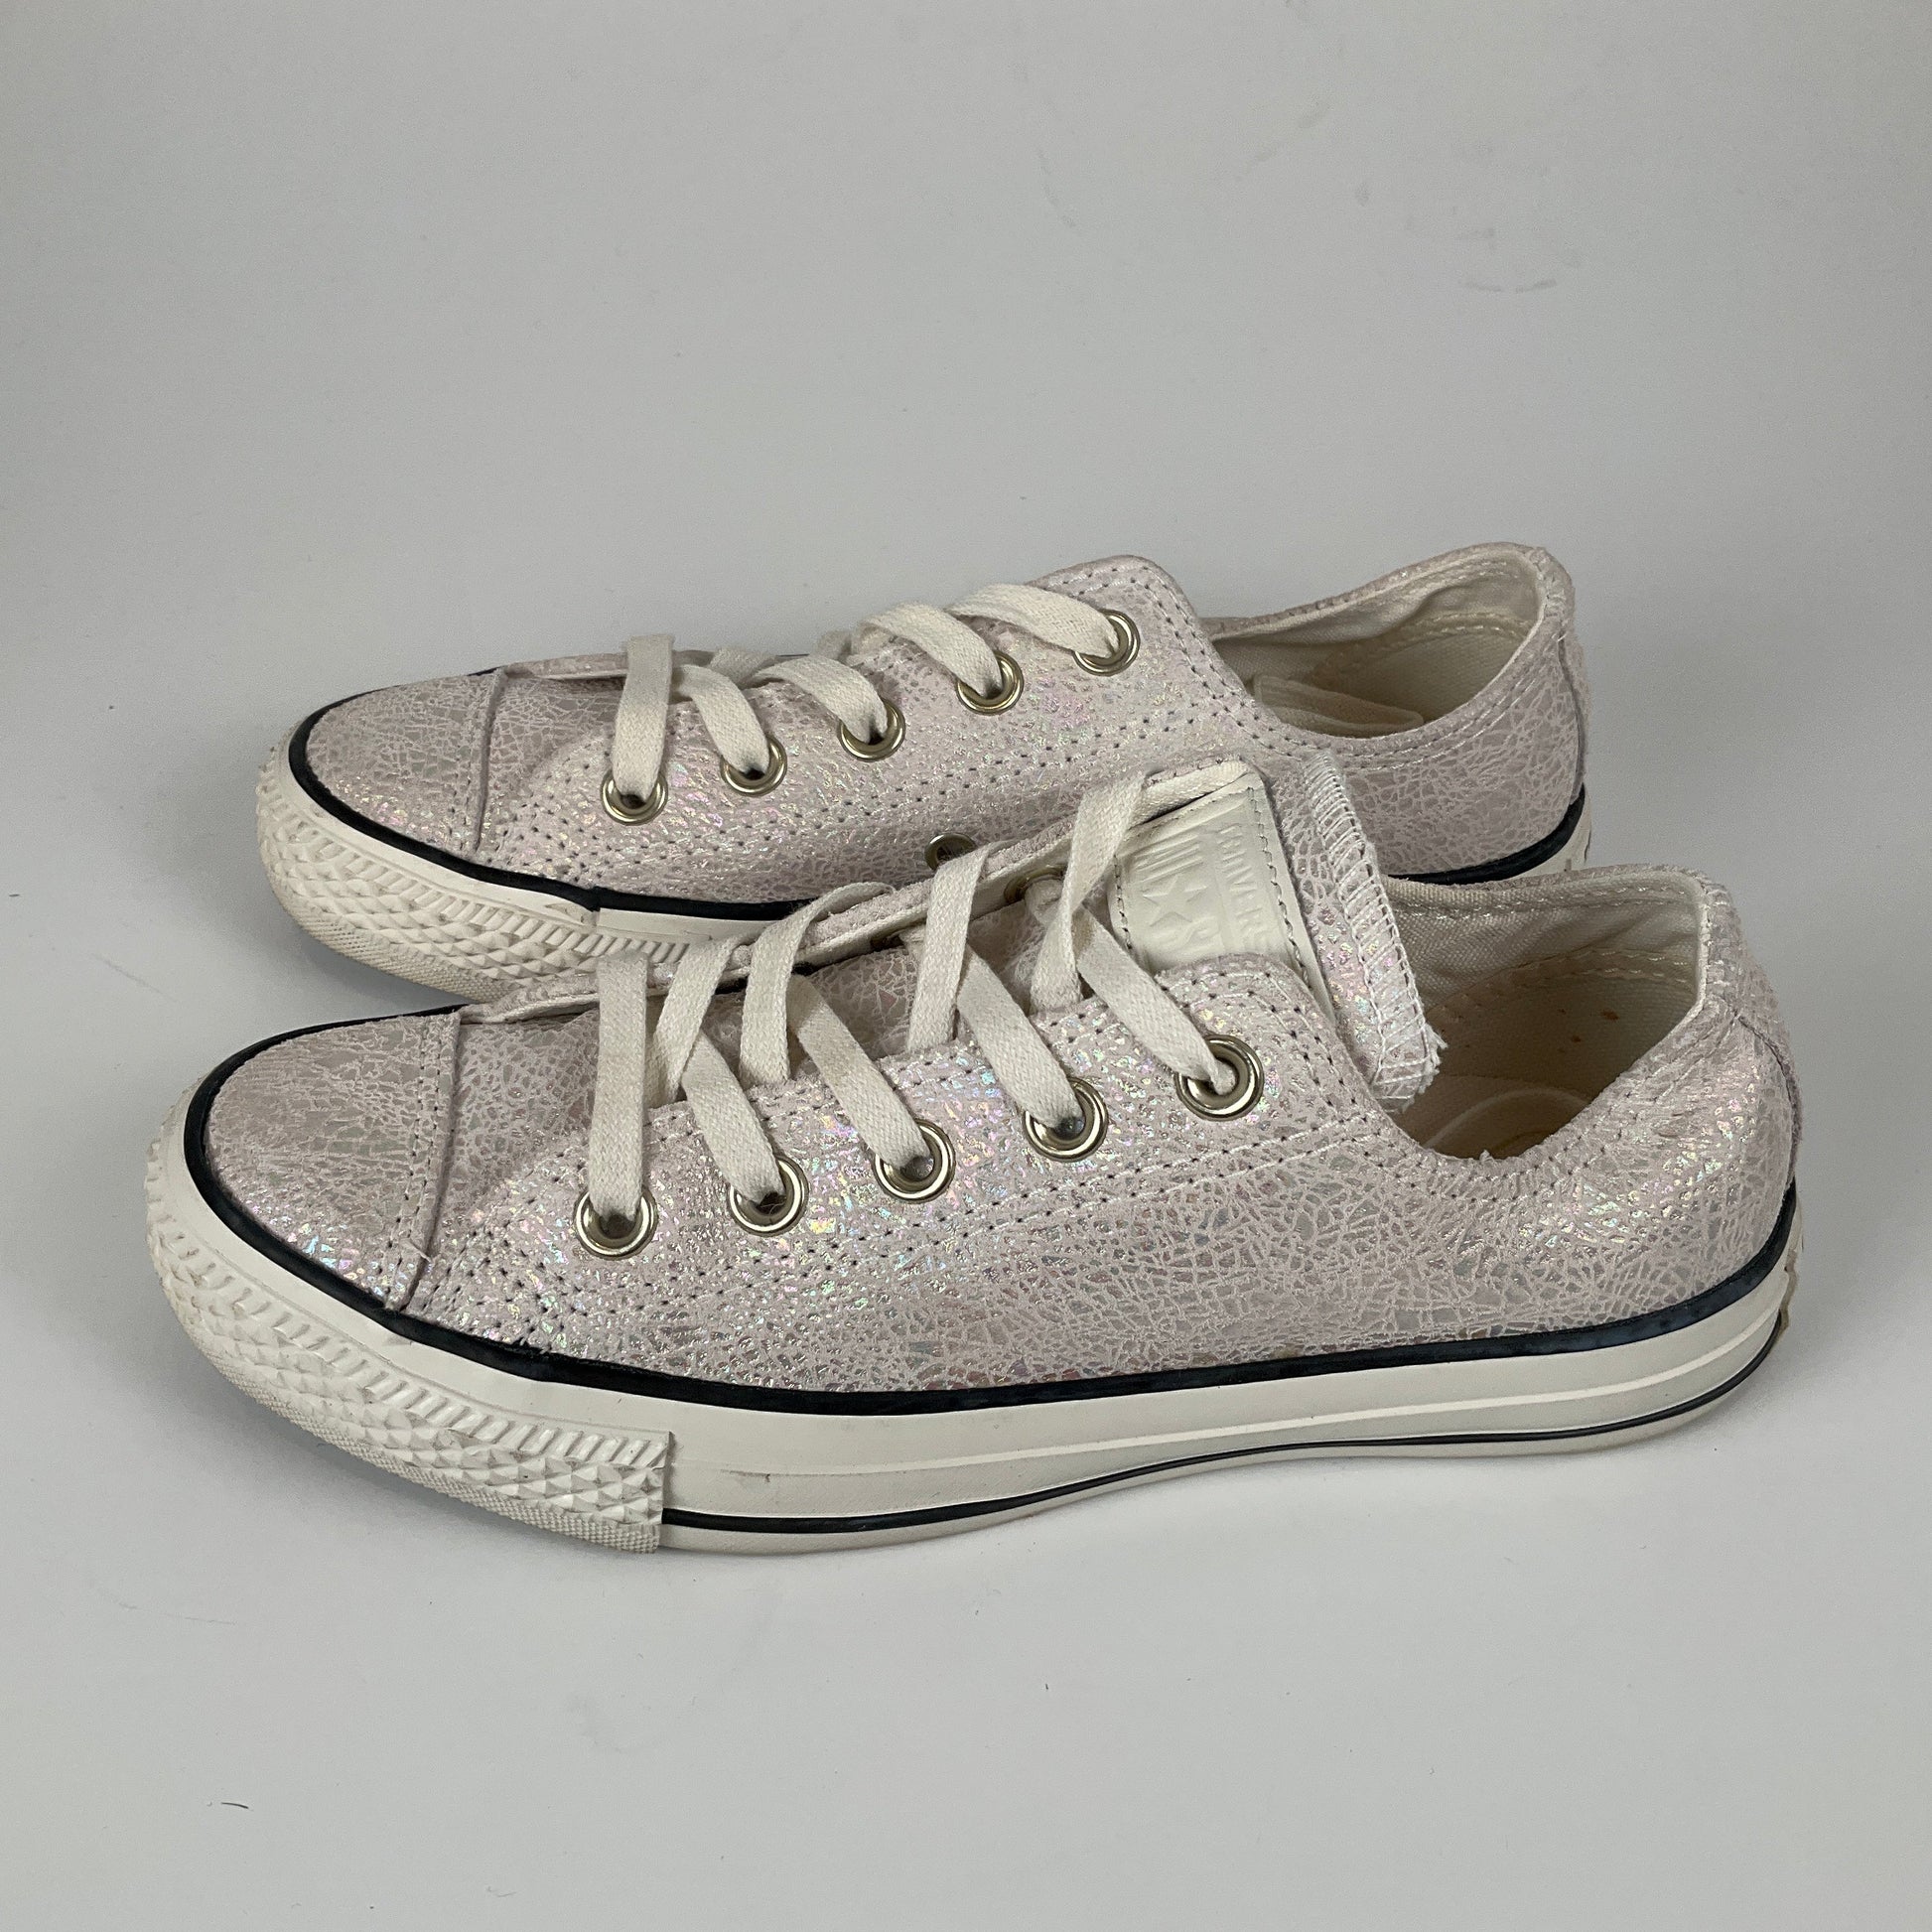 Converse - Sneakers Size 35 Shoes